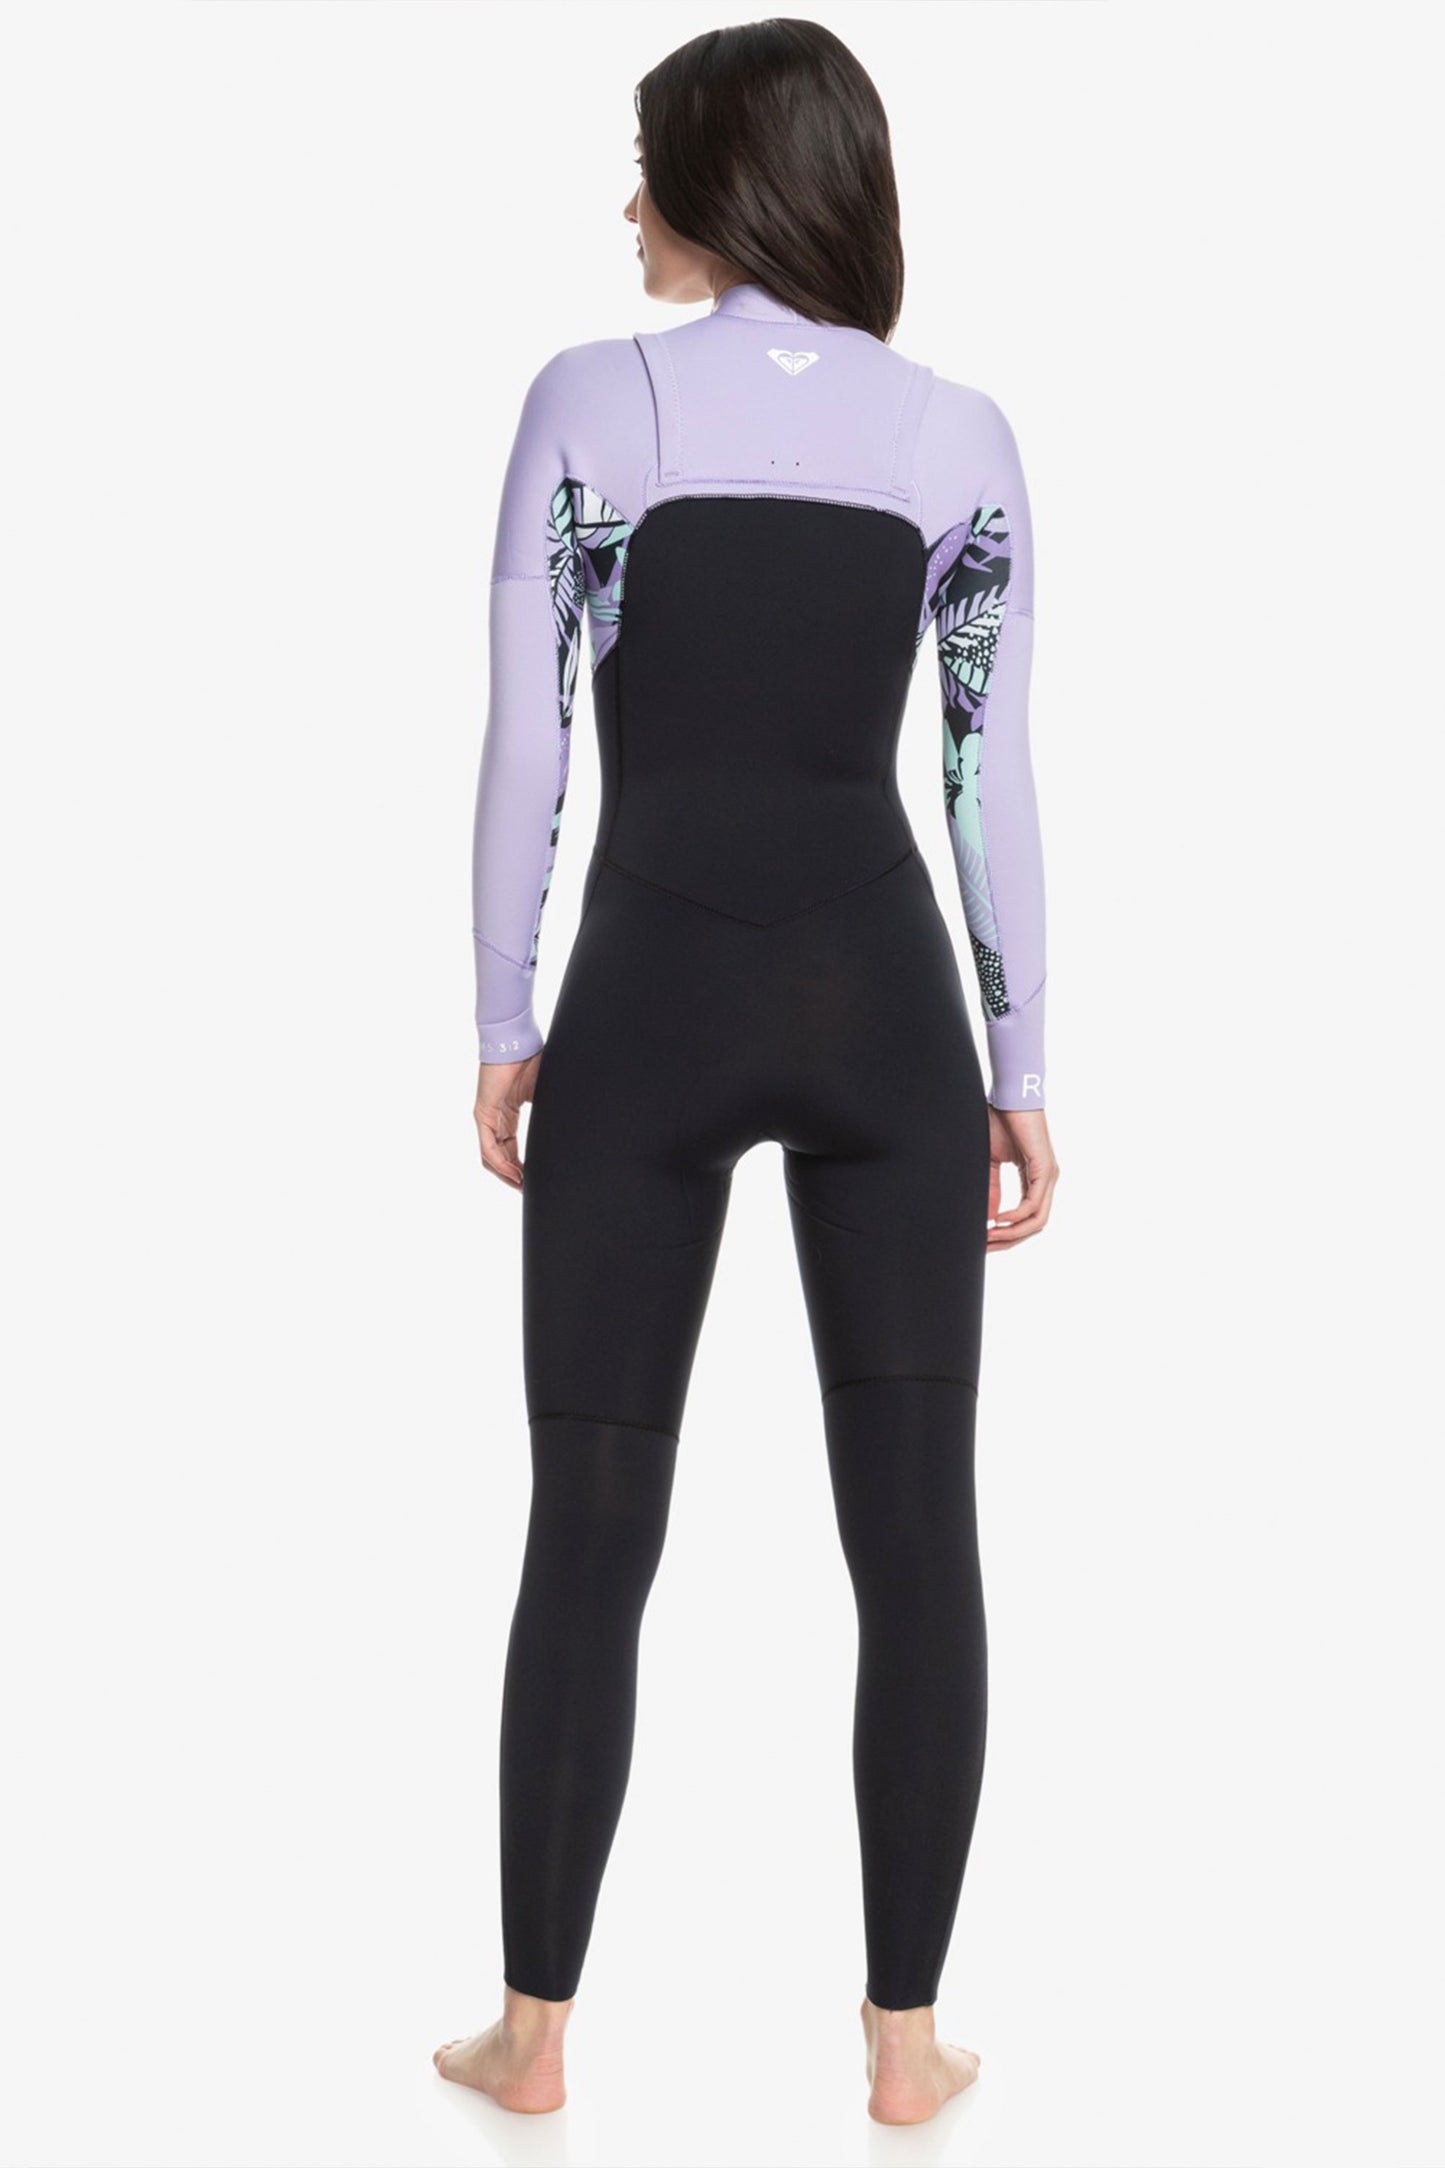 Pukas-Surf-Shop-Roxy-Wetsuit-5-4-3mm-Swell-Series